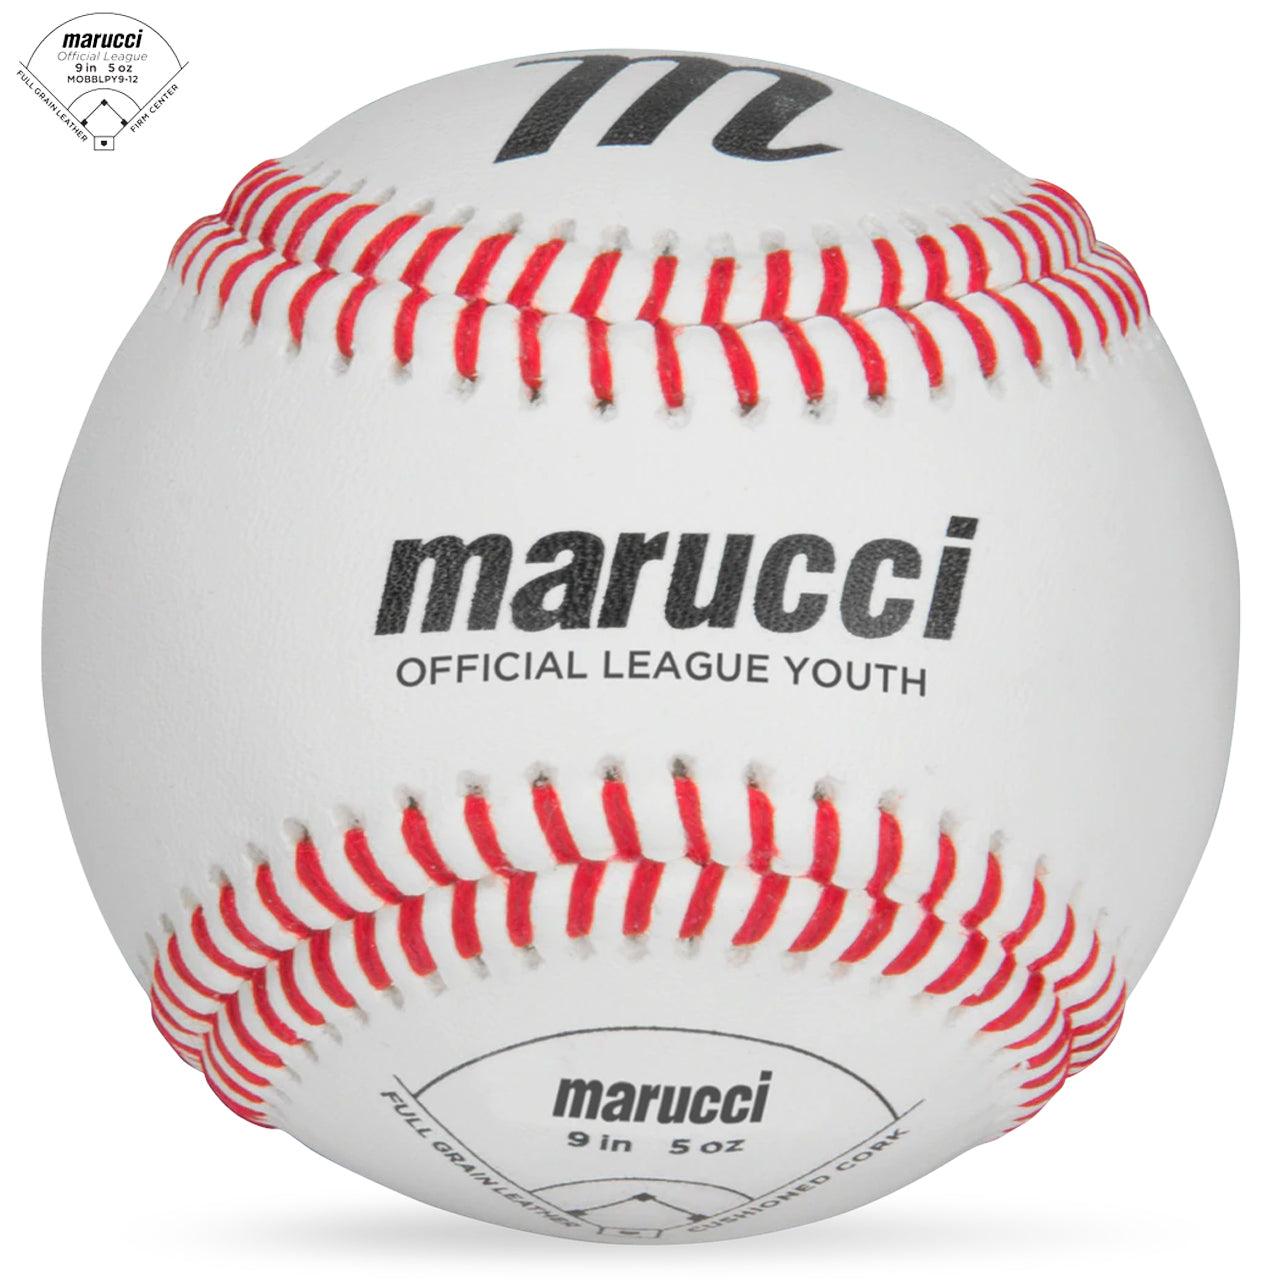 Marucci Official League Youth Baseballs - MOBBLPY9 - 12 Pack - Smash It Sports